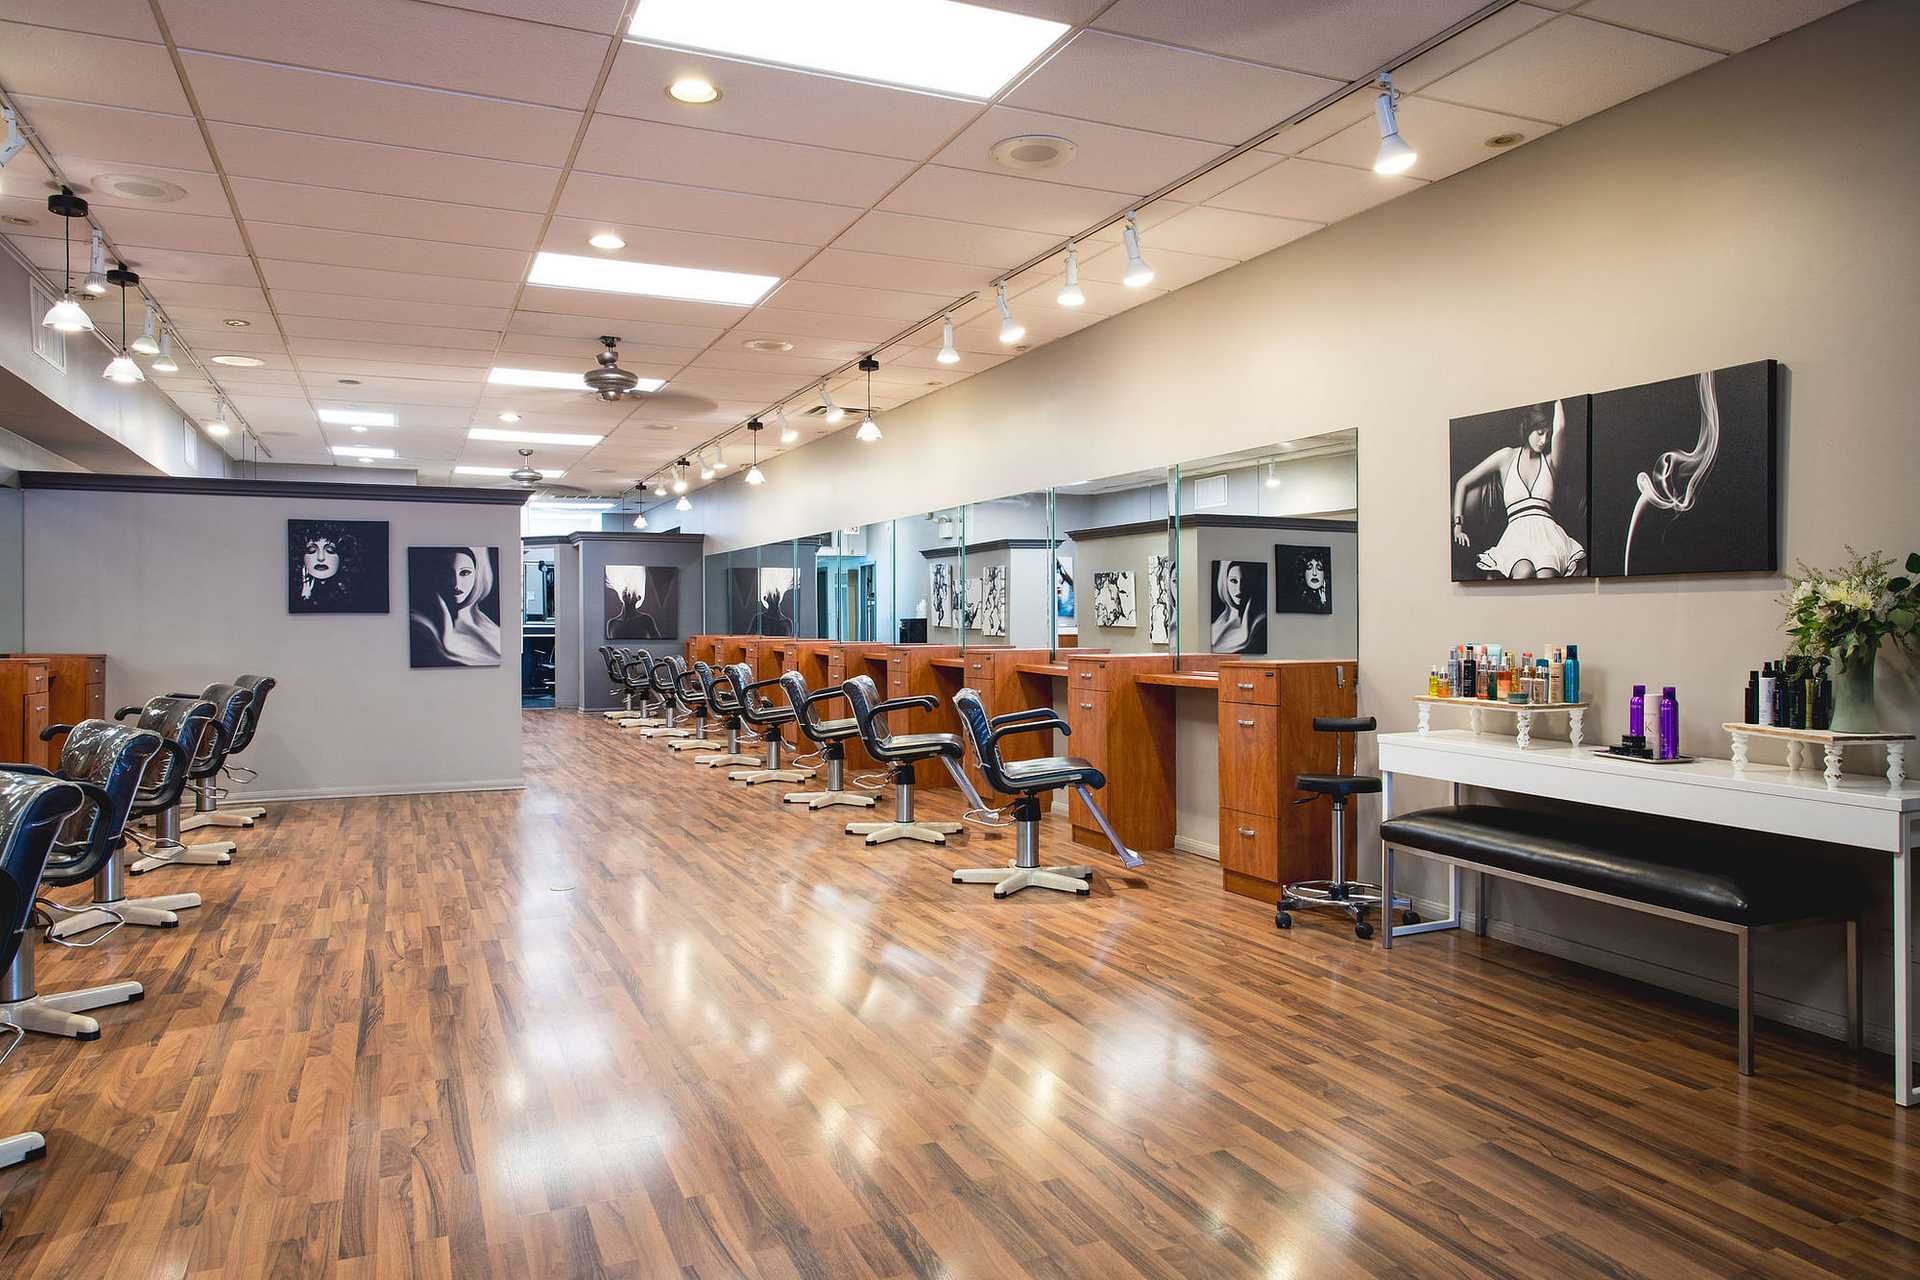 Modern, spacious hair salon with hardwood floors, multiple styling stations, and art on the walls.